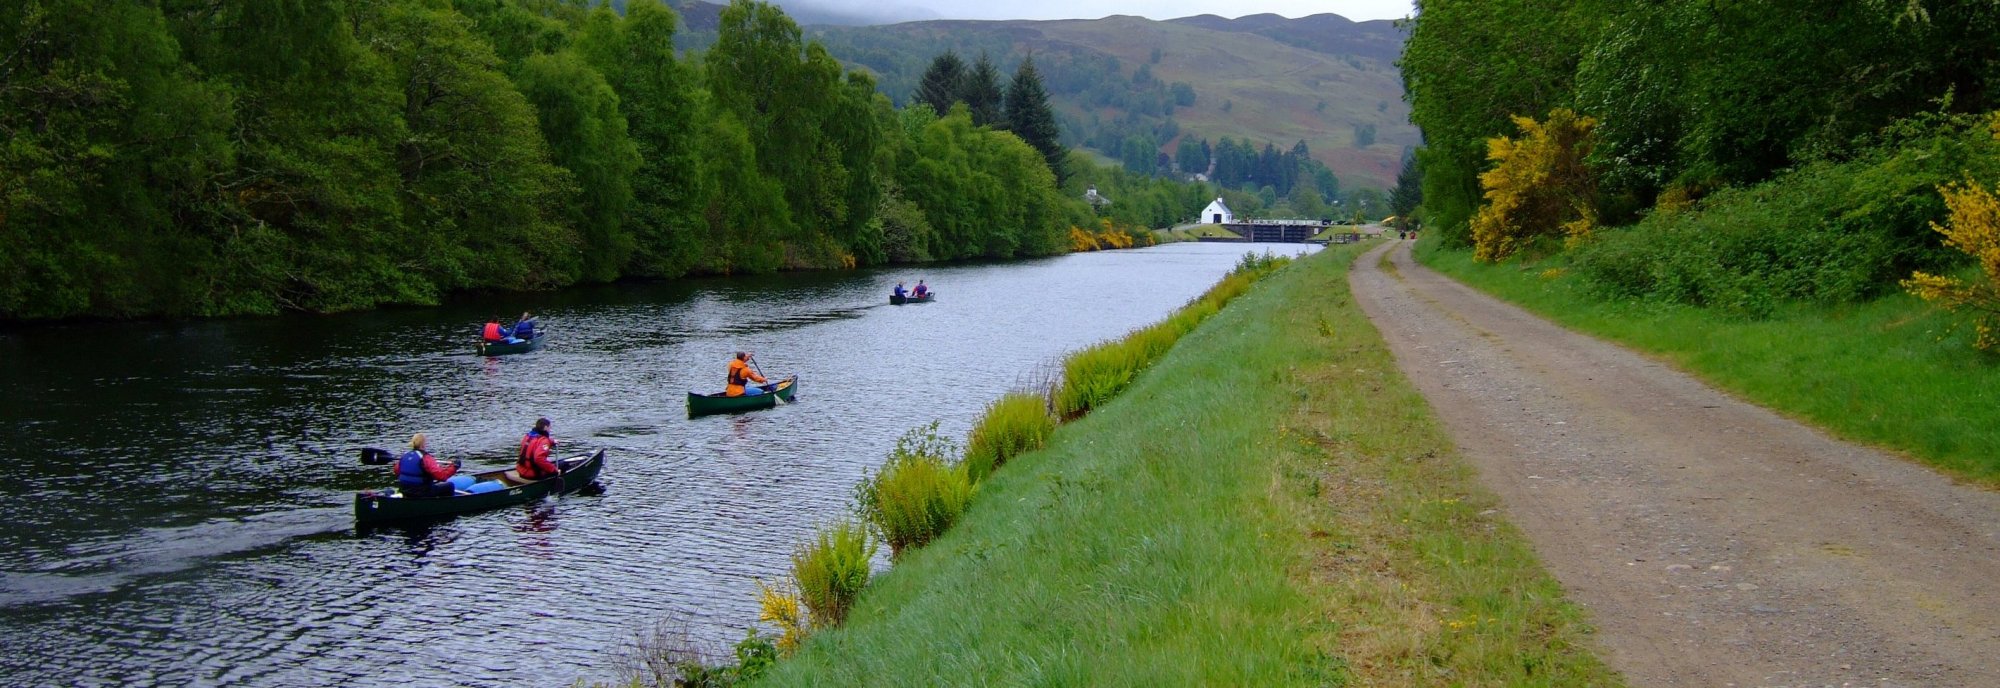 Canoeists on the canal